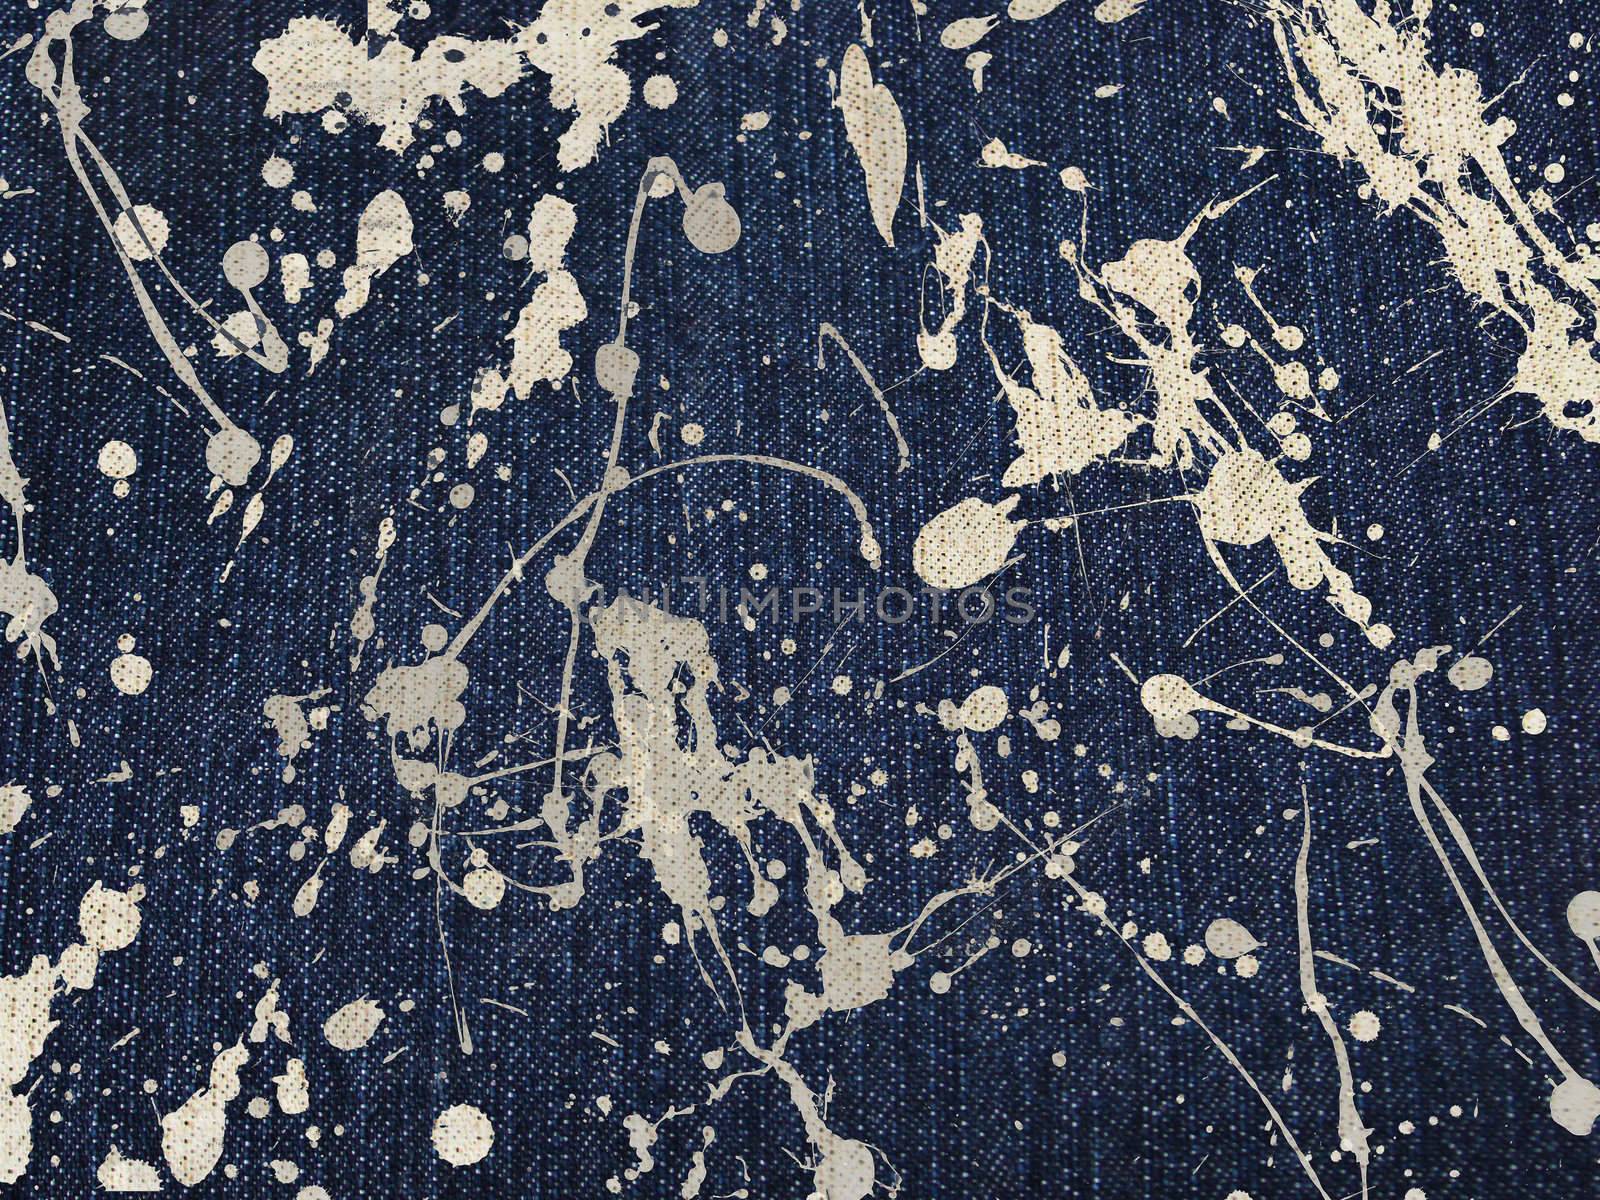 Blue denim stained cloth background by Flaps